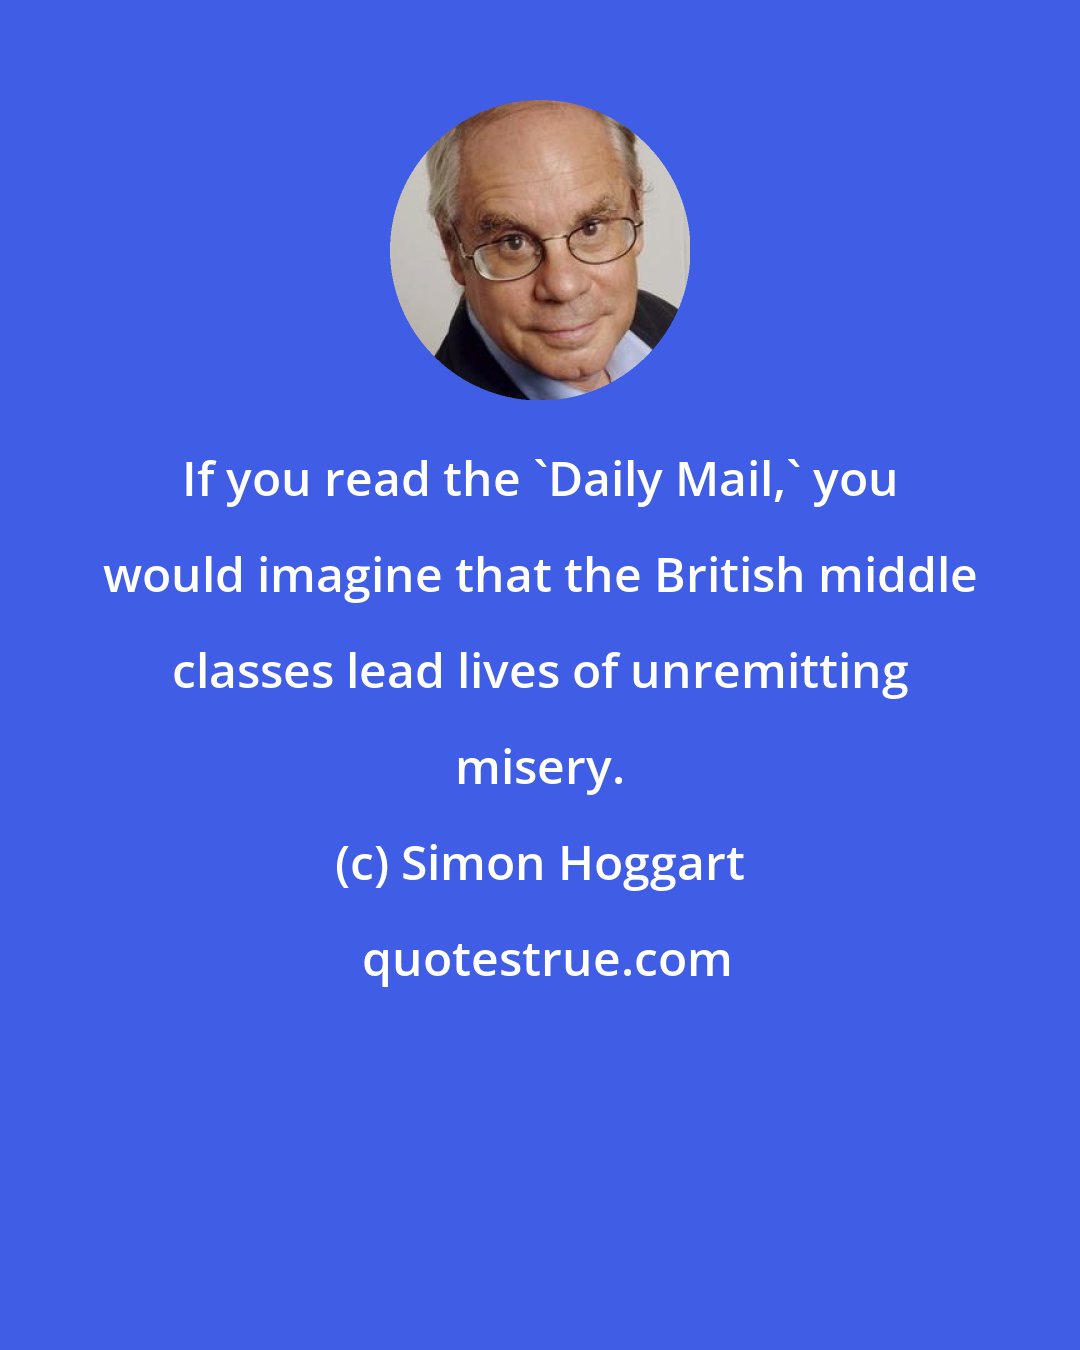 Simon Hoggart: If you read the 'Daily Mail,' you would imagine that the British middle classes lead lives of unremitting misery.